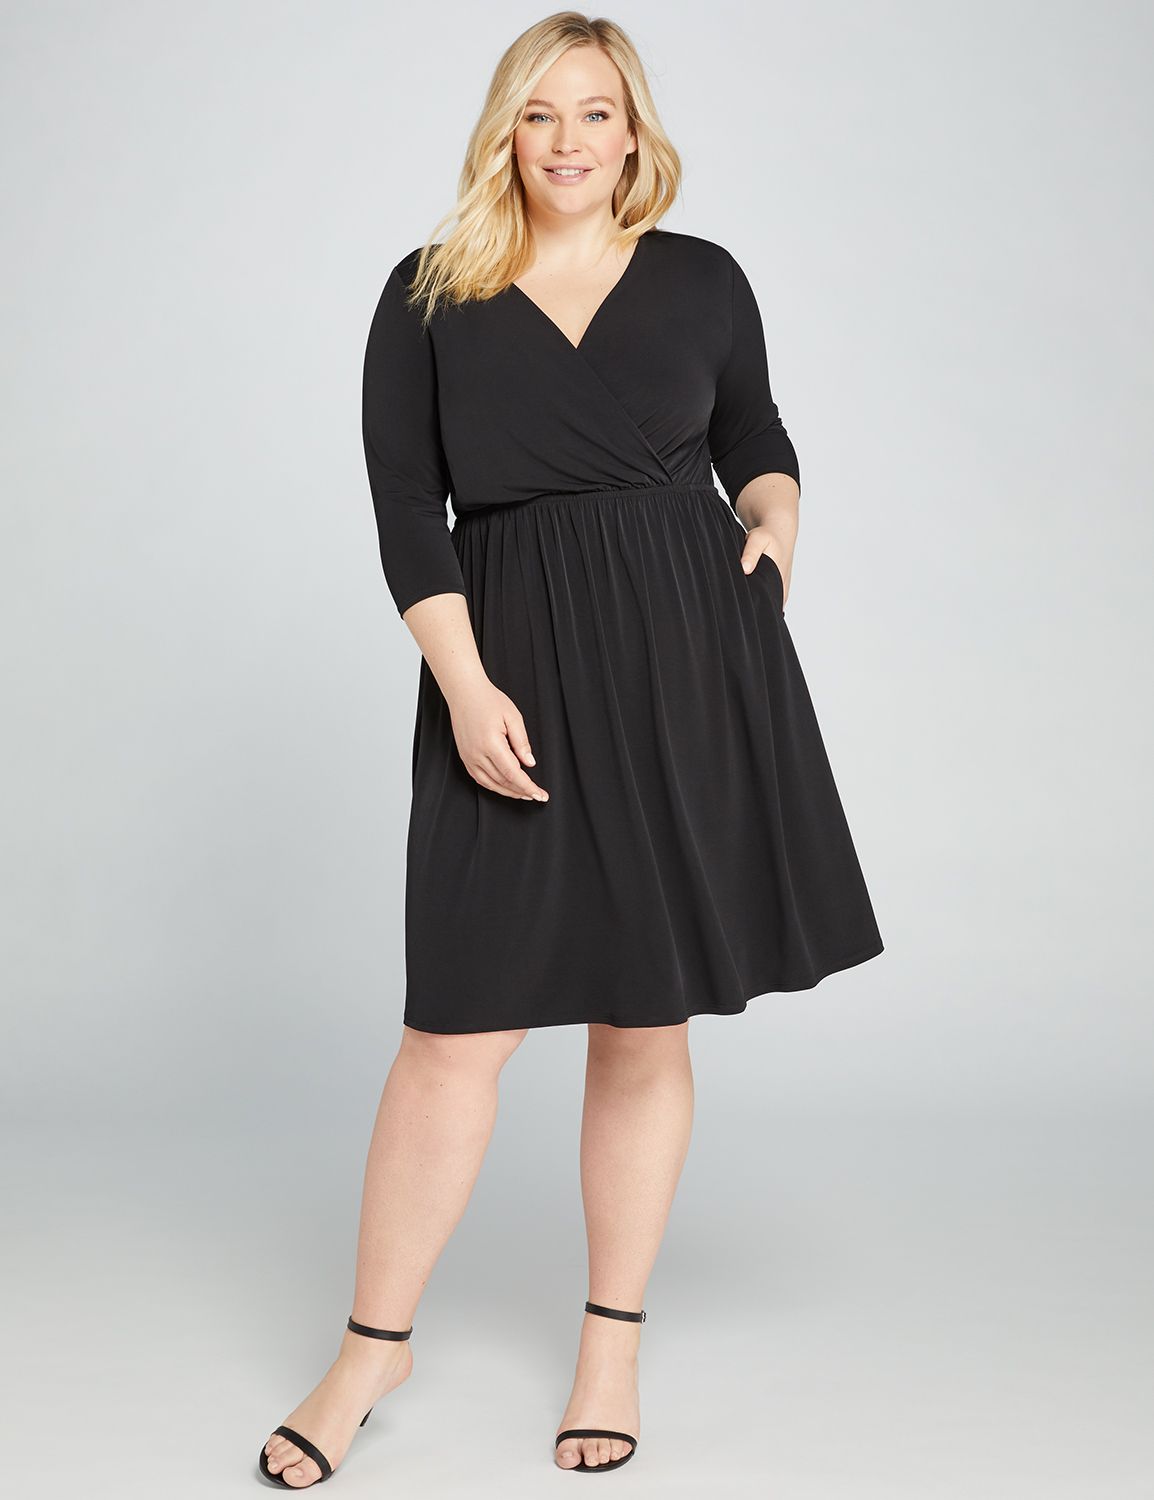 dresses for overweight